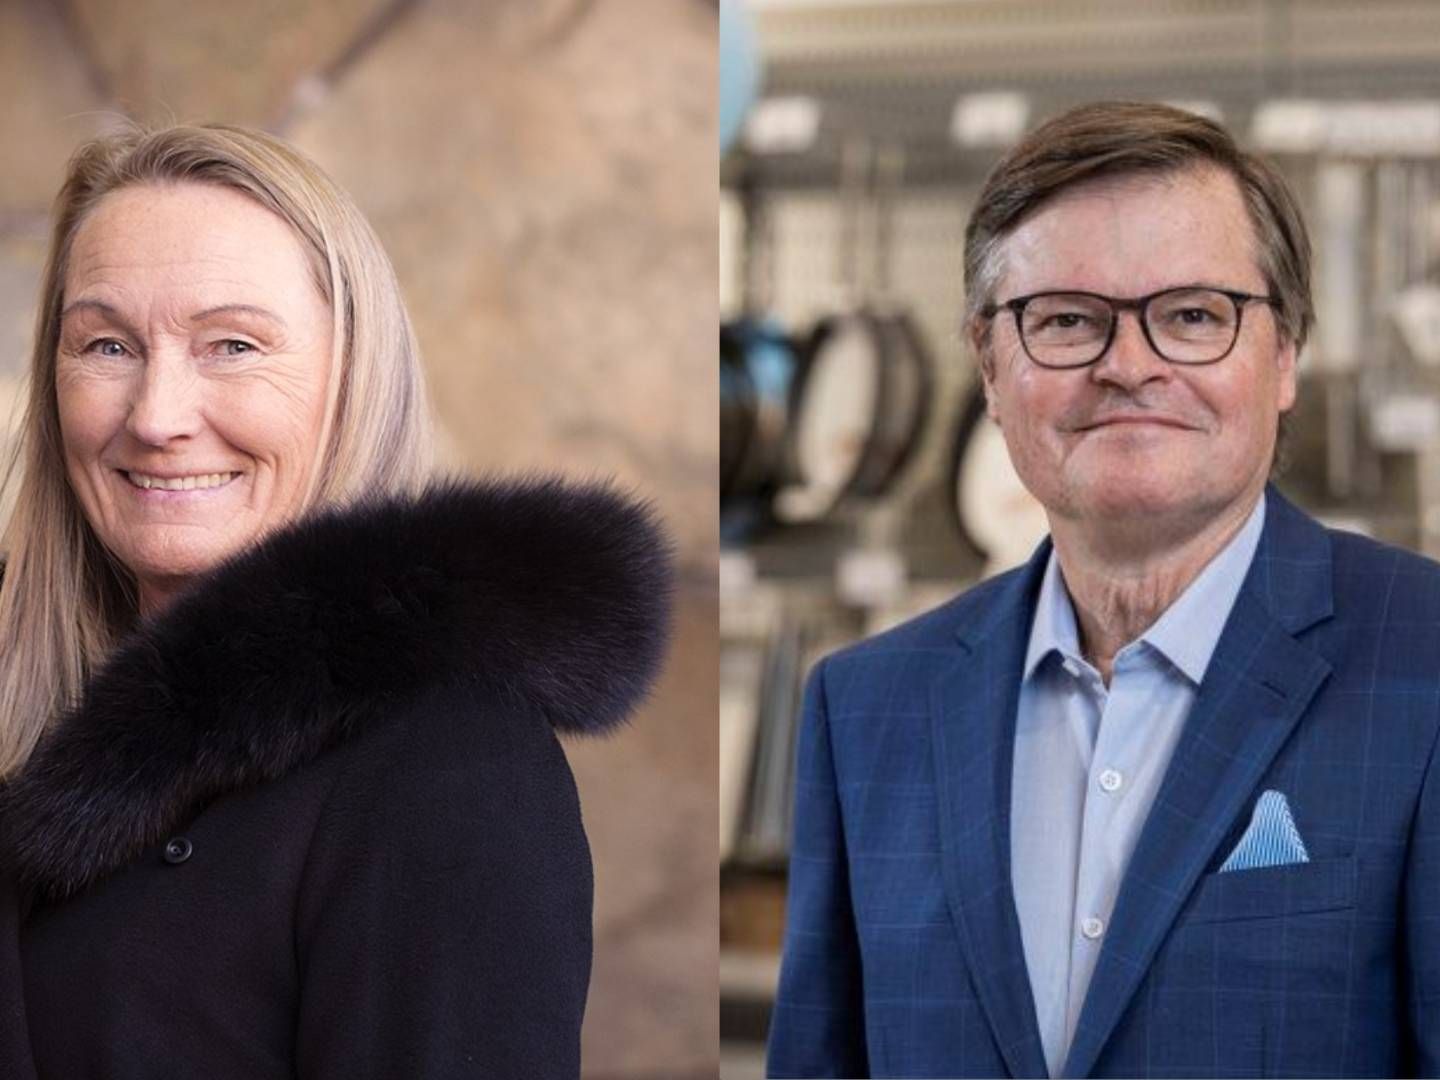 Acting CEO Katarina Thorslund says that Alecta deserves criticism, while the chairman of the supervisory board, Kenneth Bengtsson, sees no reason for further dismissals. | Photo: PR/ Alecta and Clas Ohlson